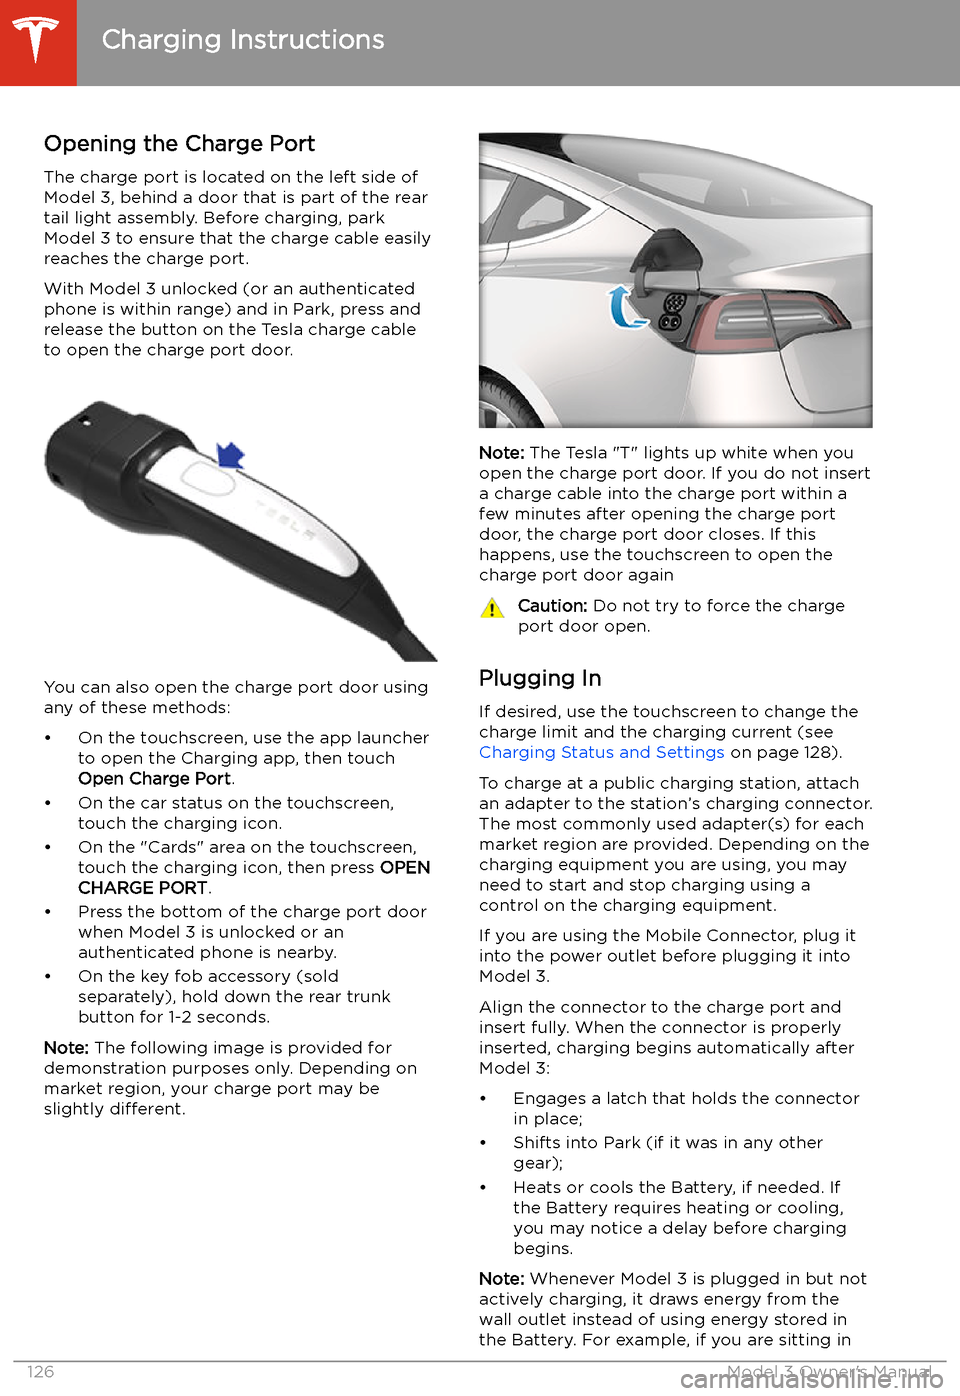 TESLA MODEL 3 2019  Owners Manual (Europe) Charging Instructions
Opening the Charge Port The charge port is located on the left side of
Model 3, behind a door that is part of the rear
tail light assembly. Before charging, park
Model 3 to ensur